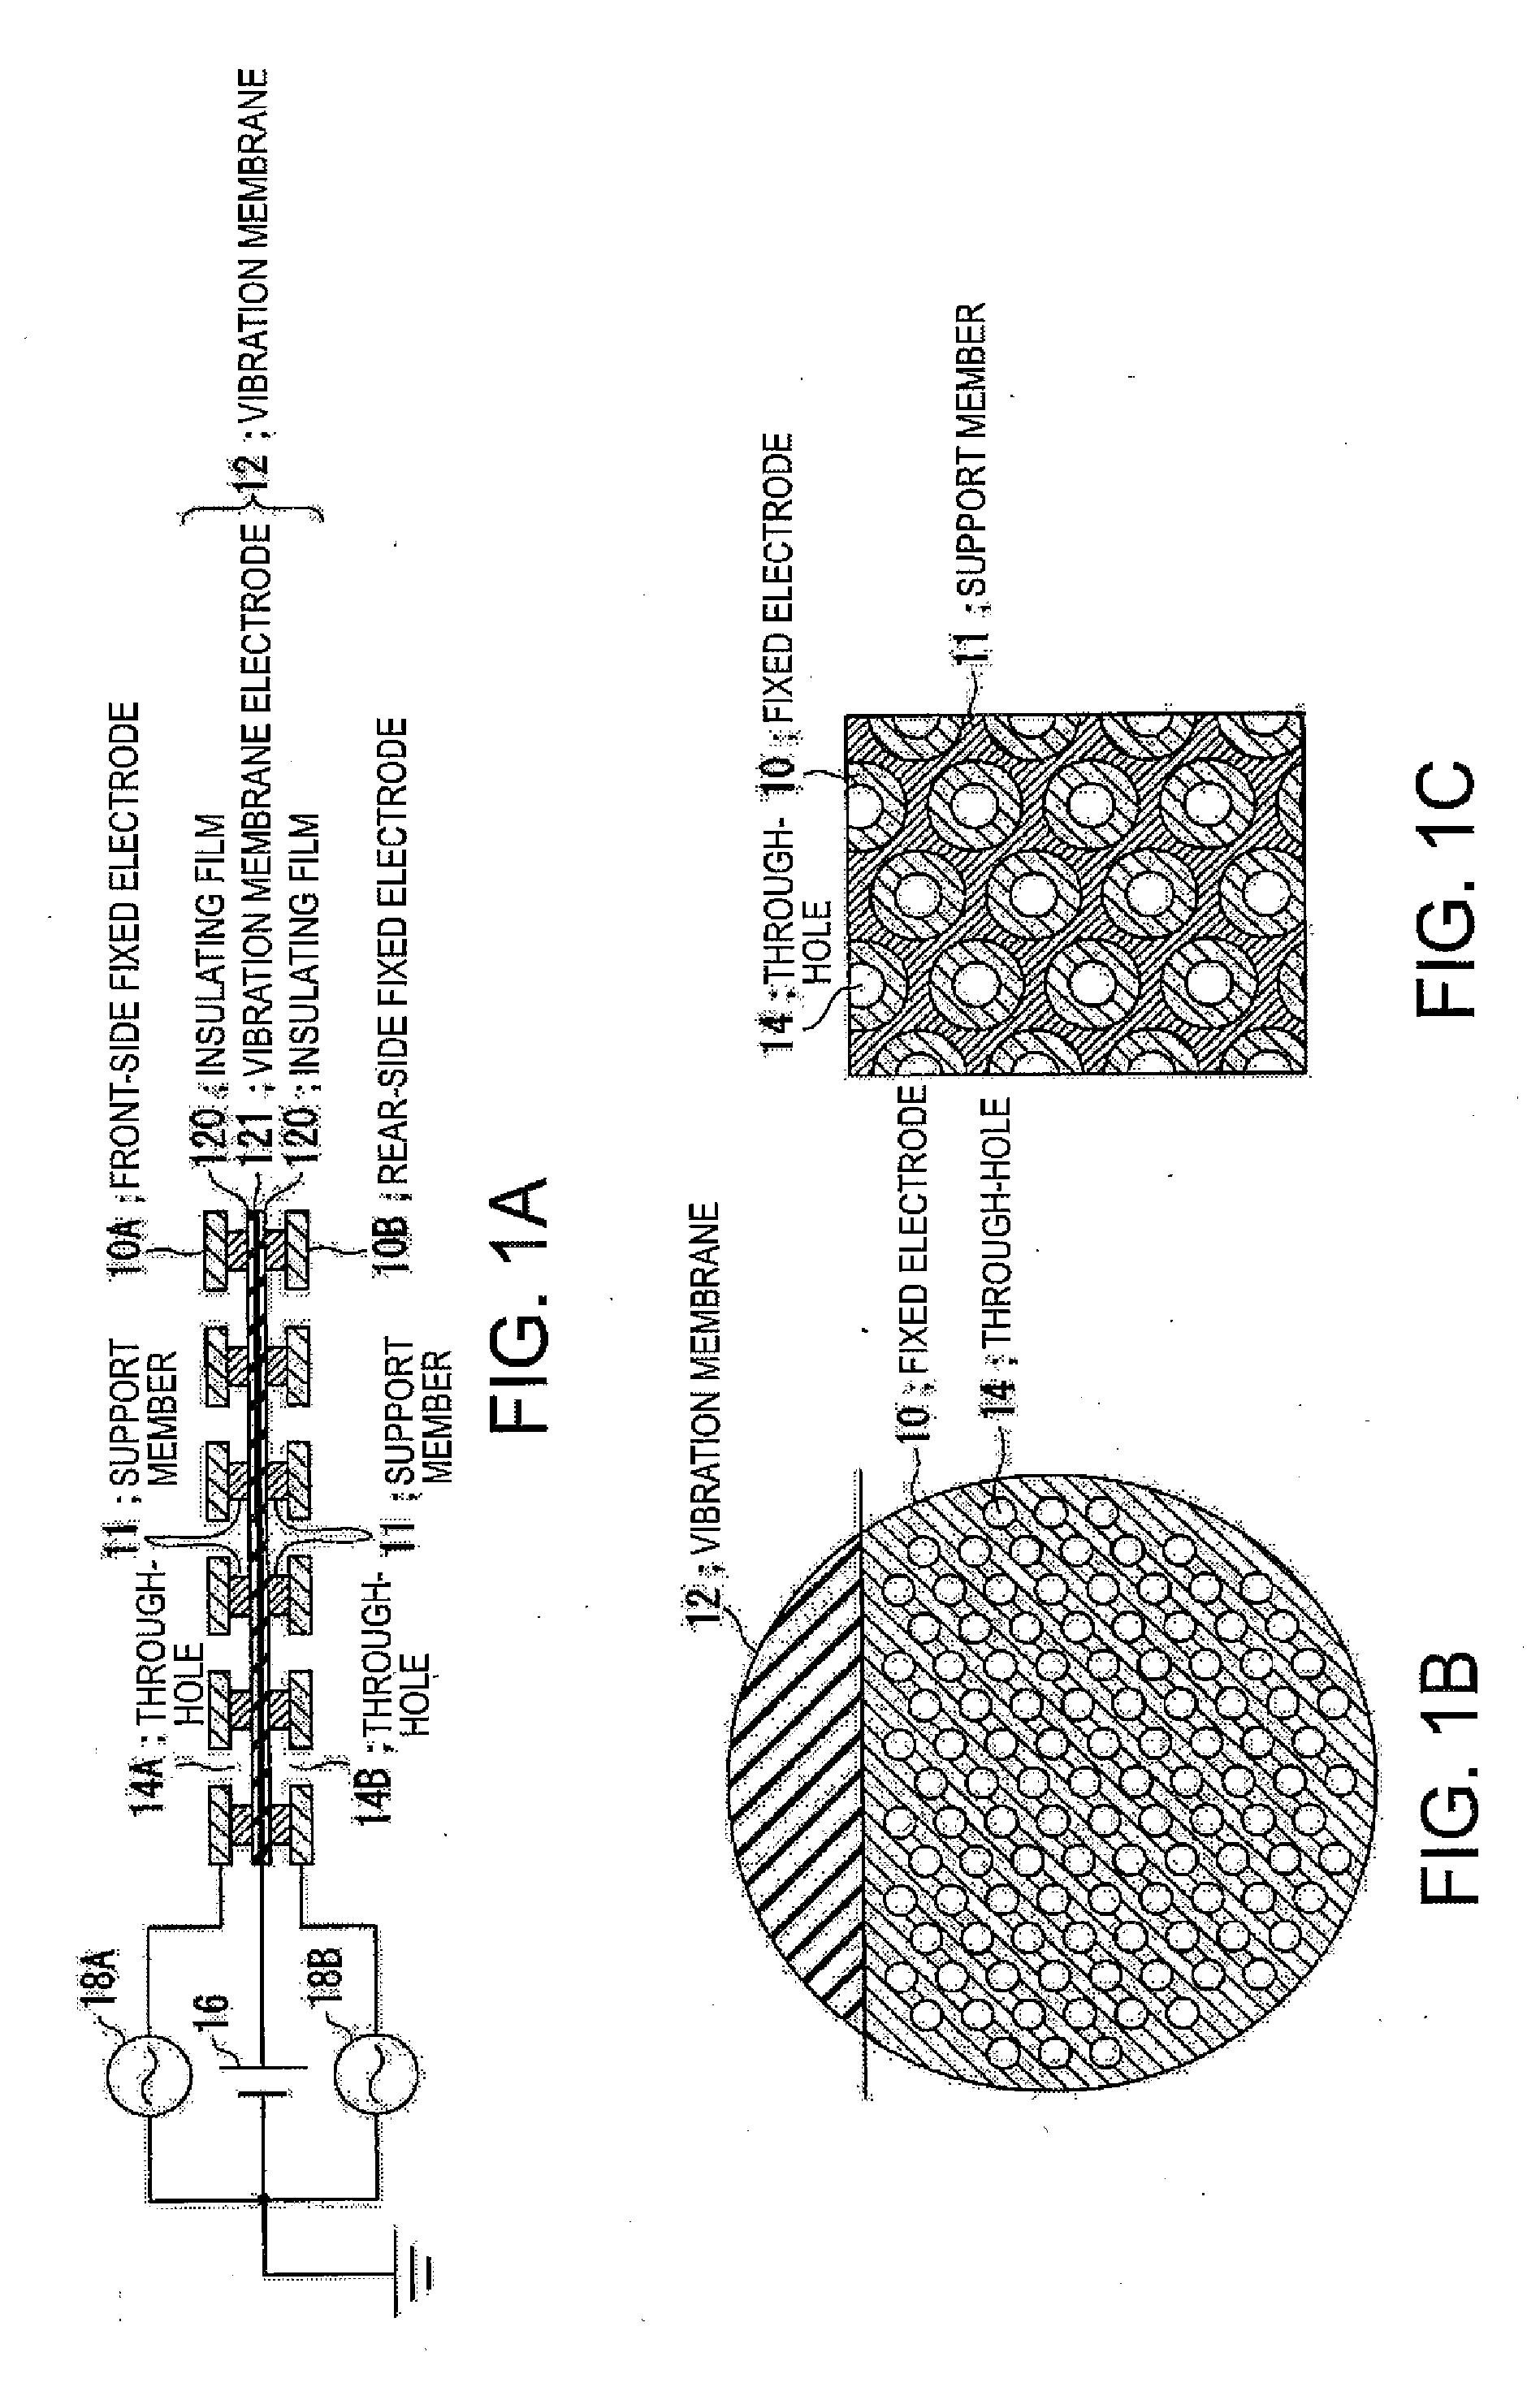 Electrostatic transducer, driving circuit of capacitive load, method for setting circuit constant, ultrasonic speaker, display device and directional acoustic system